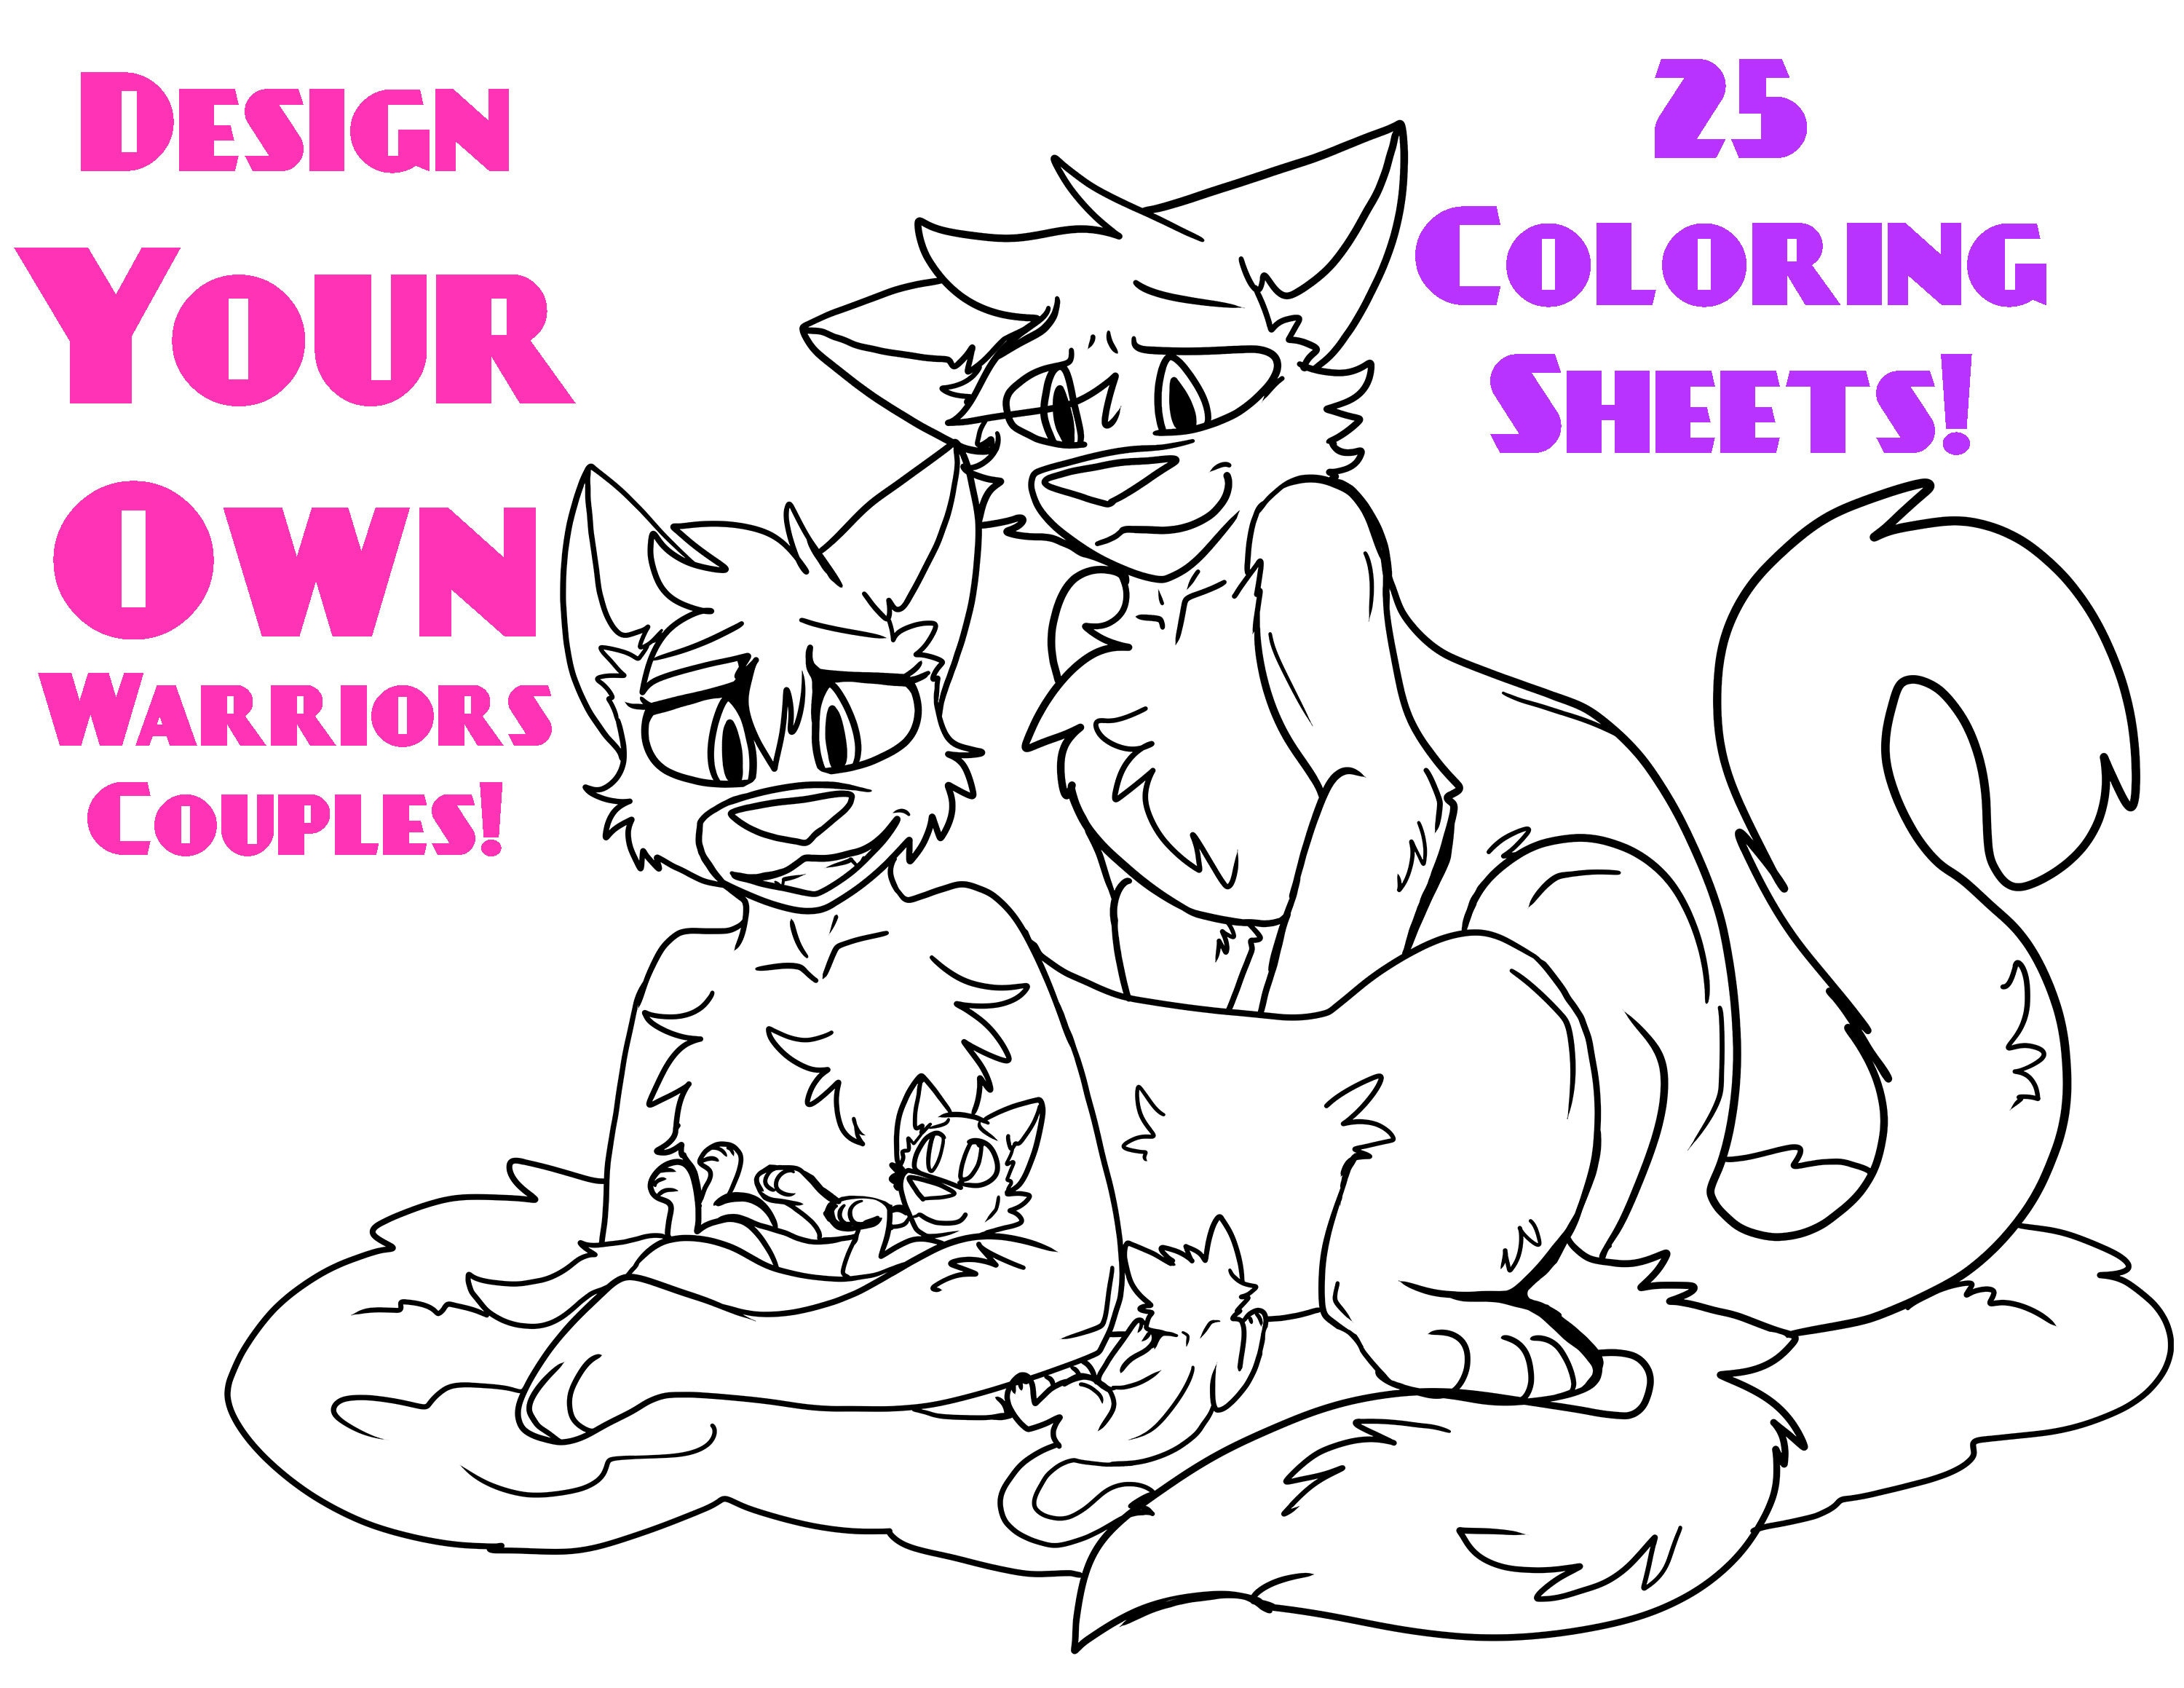 Design your own couples downloadable coloring sheets